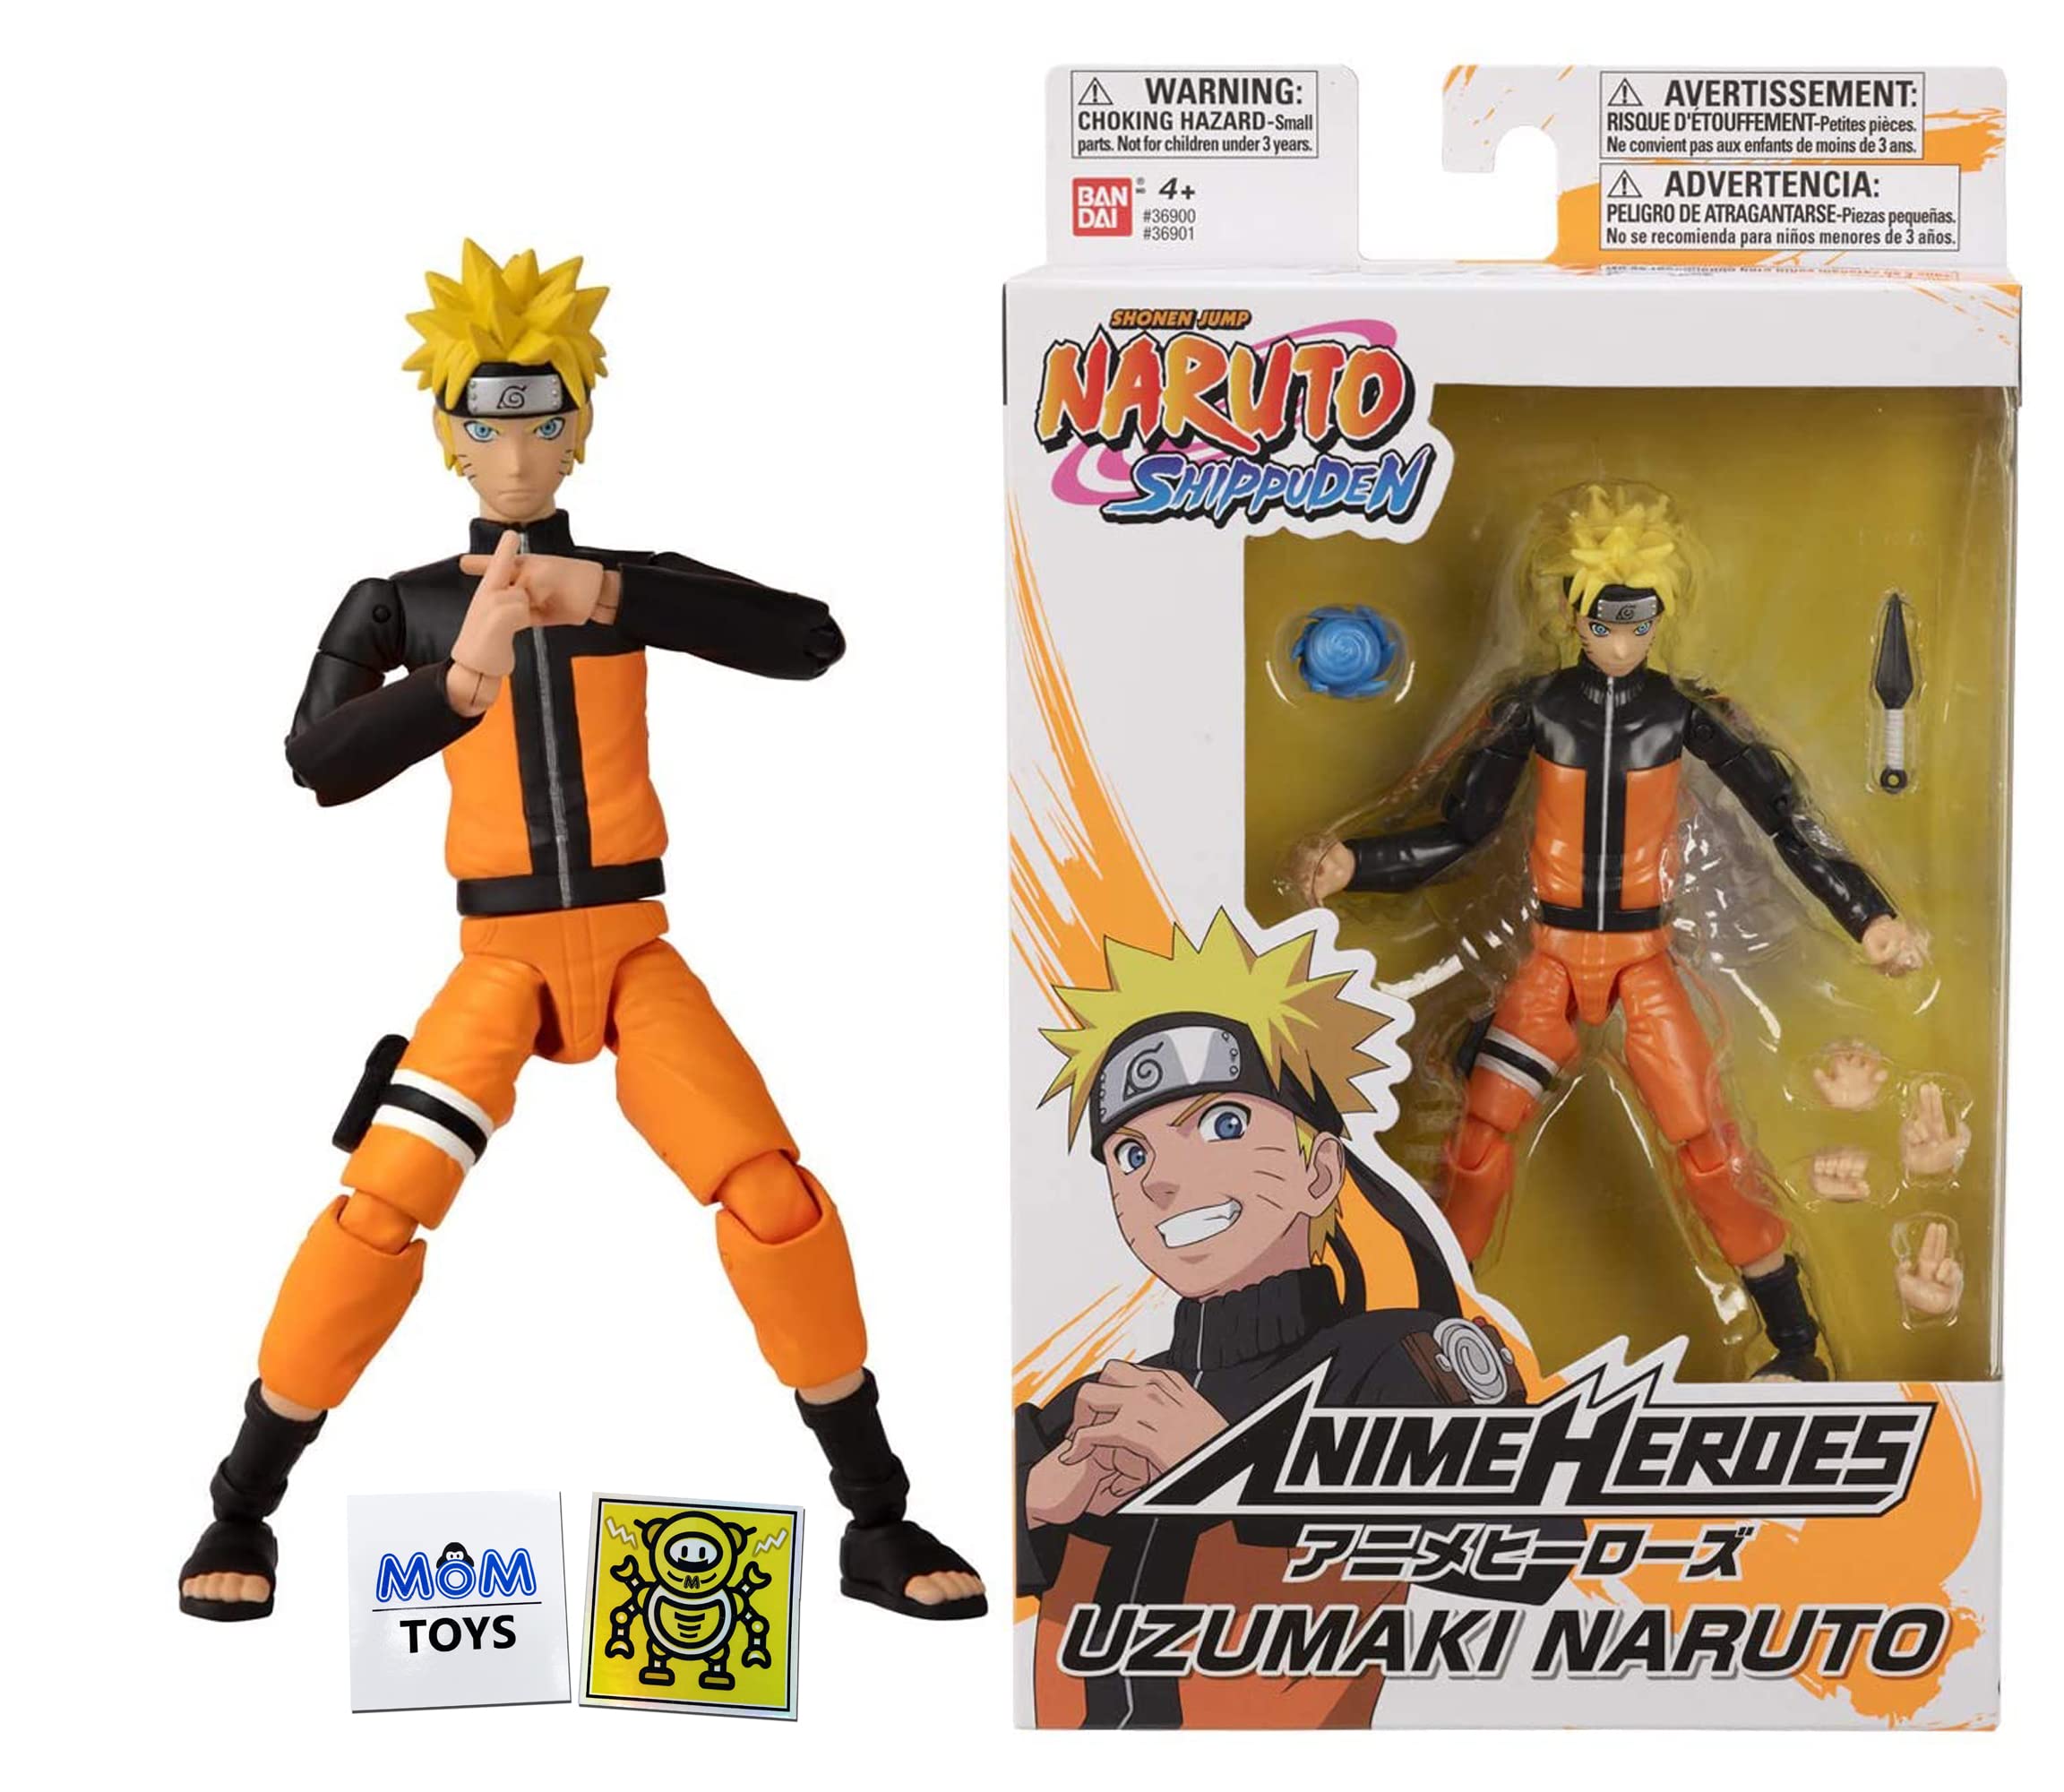 Stay updated with the newest Naruto toys